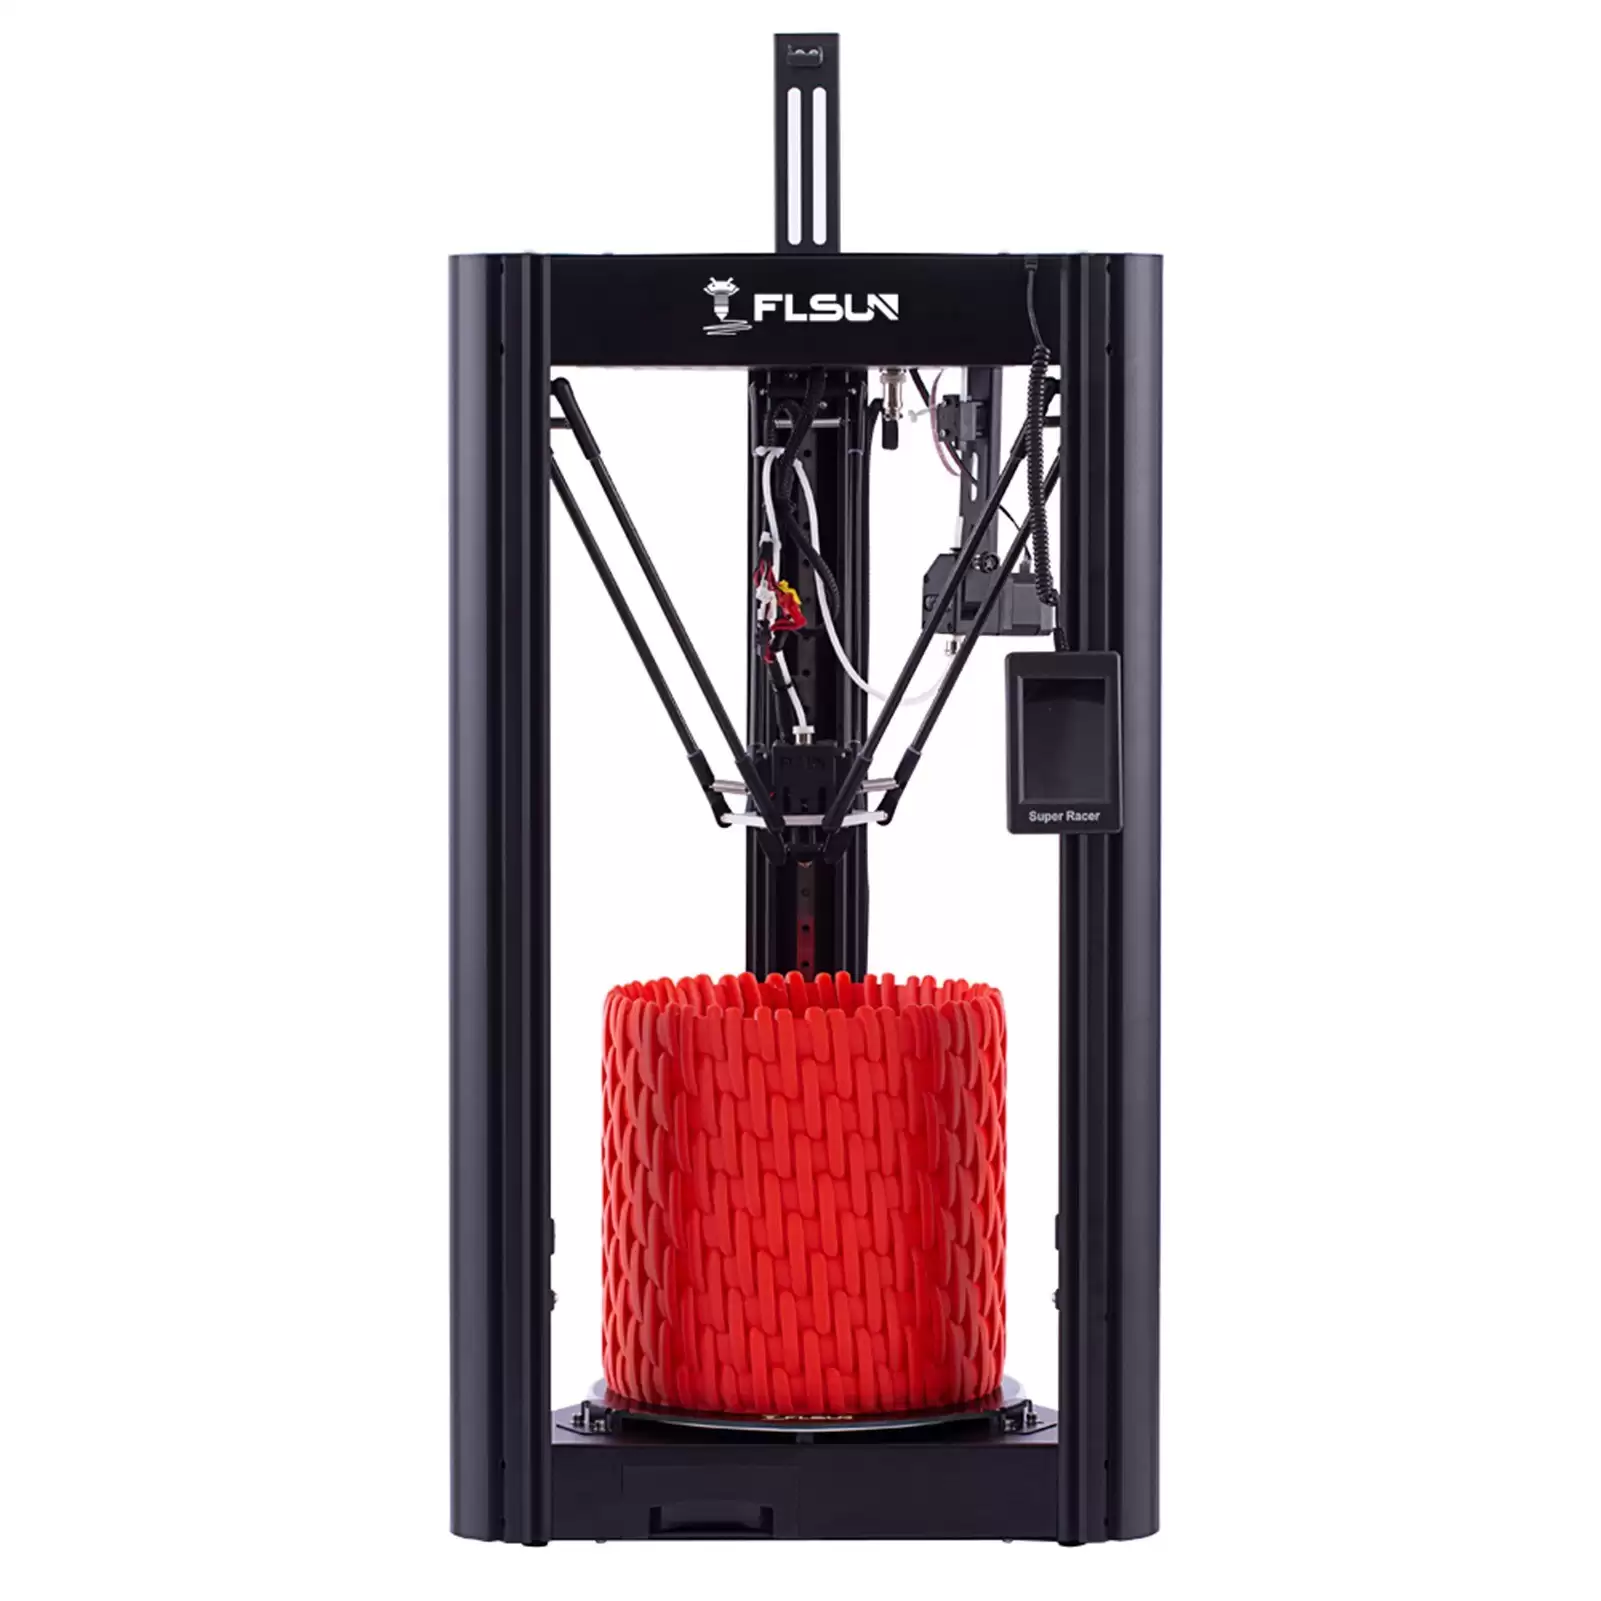 Order In Just $419.99 Flsun Sr Delta 3d Printer With 200g Pla Sample Filament Using This Tomtop Discount Code